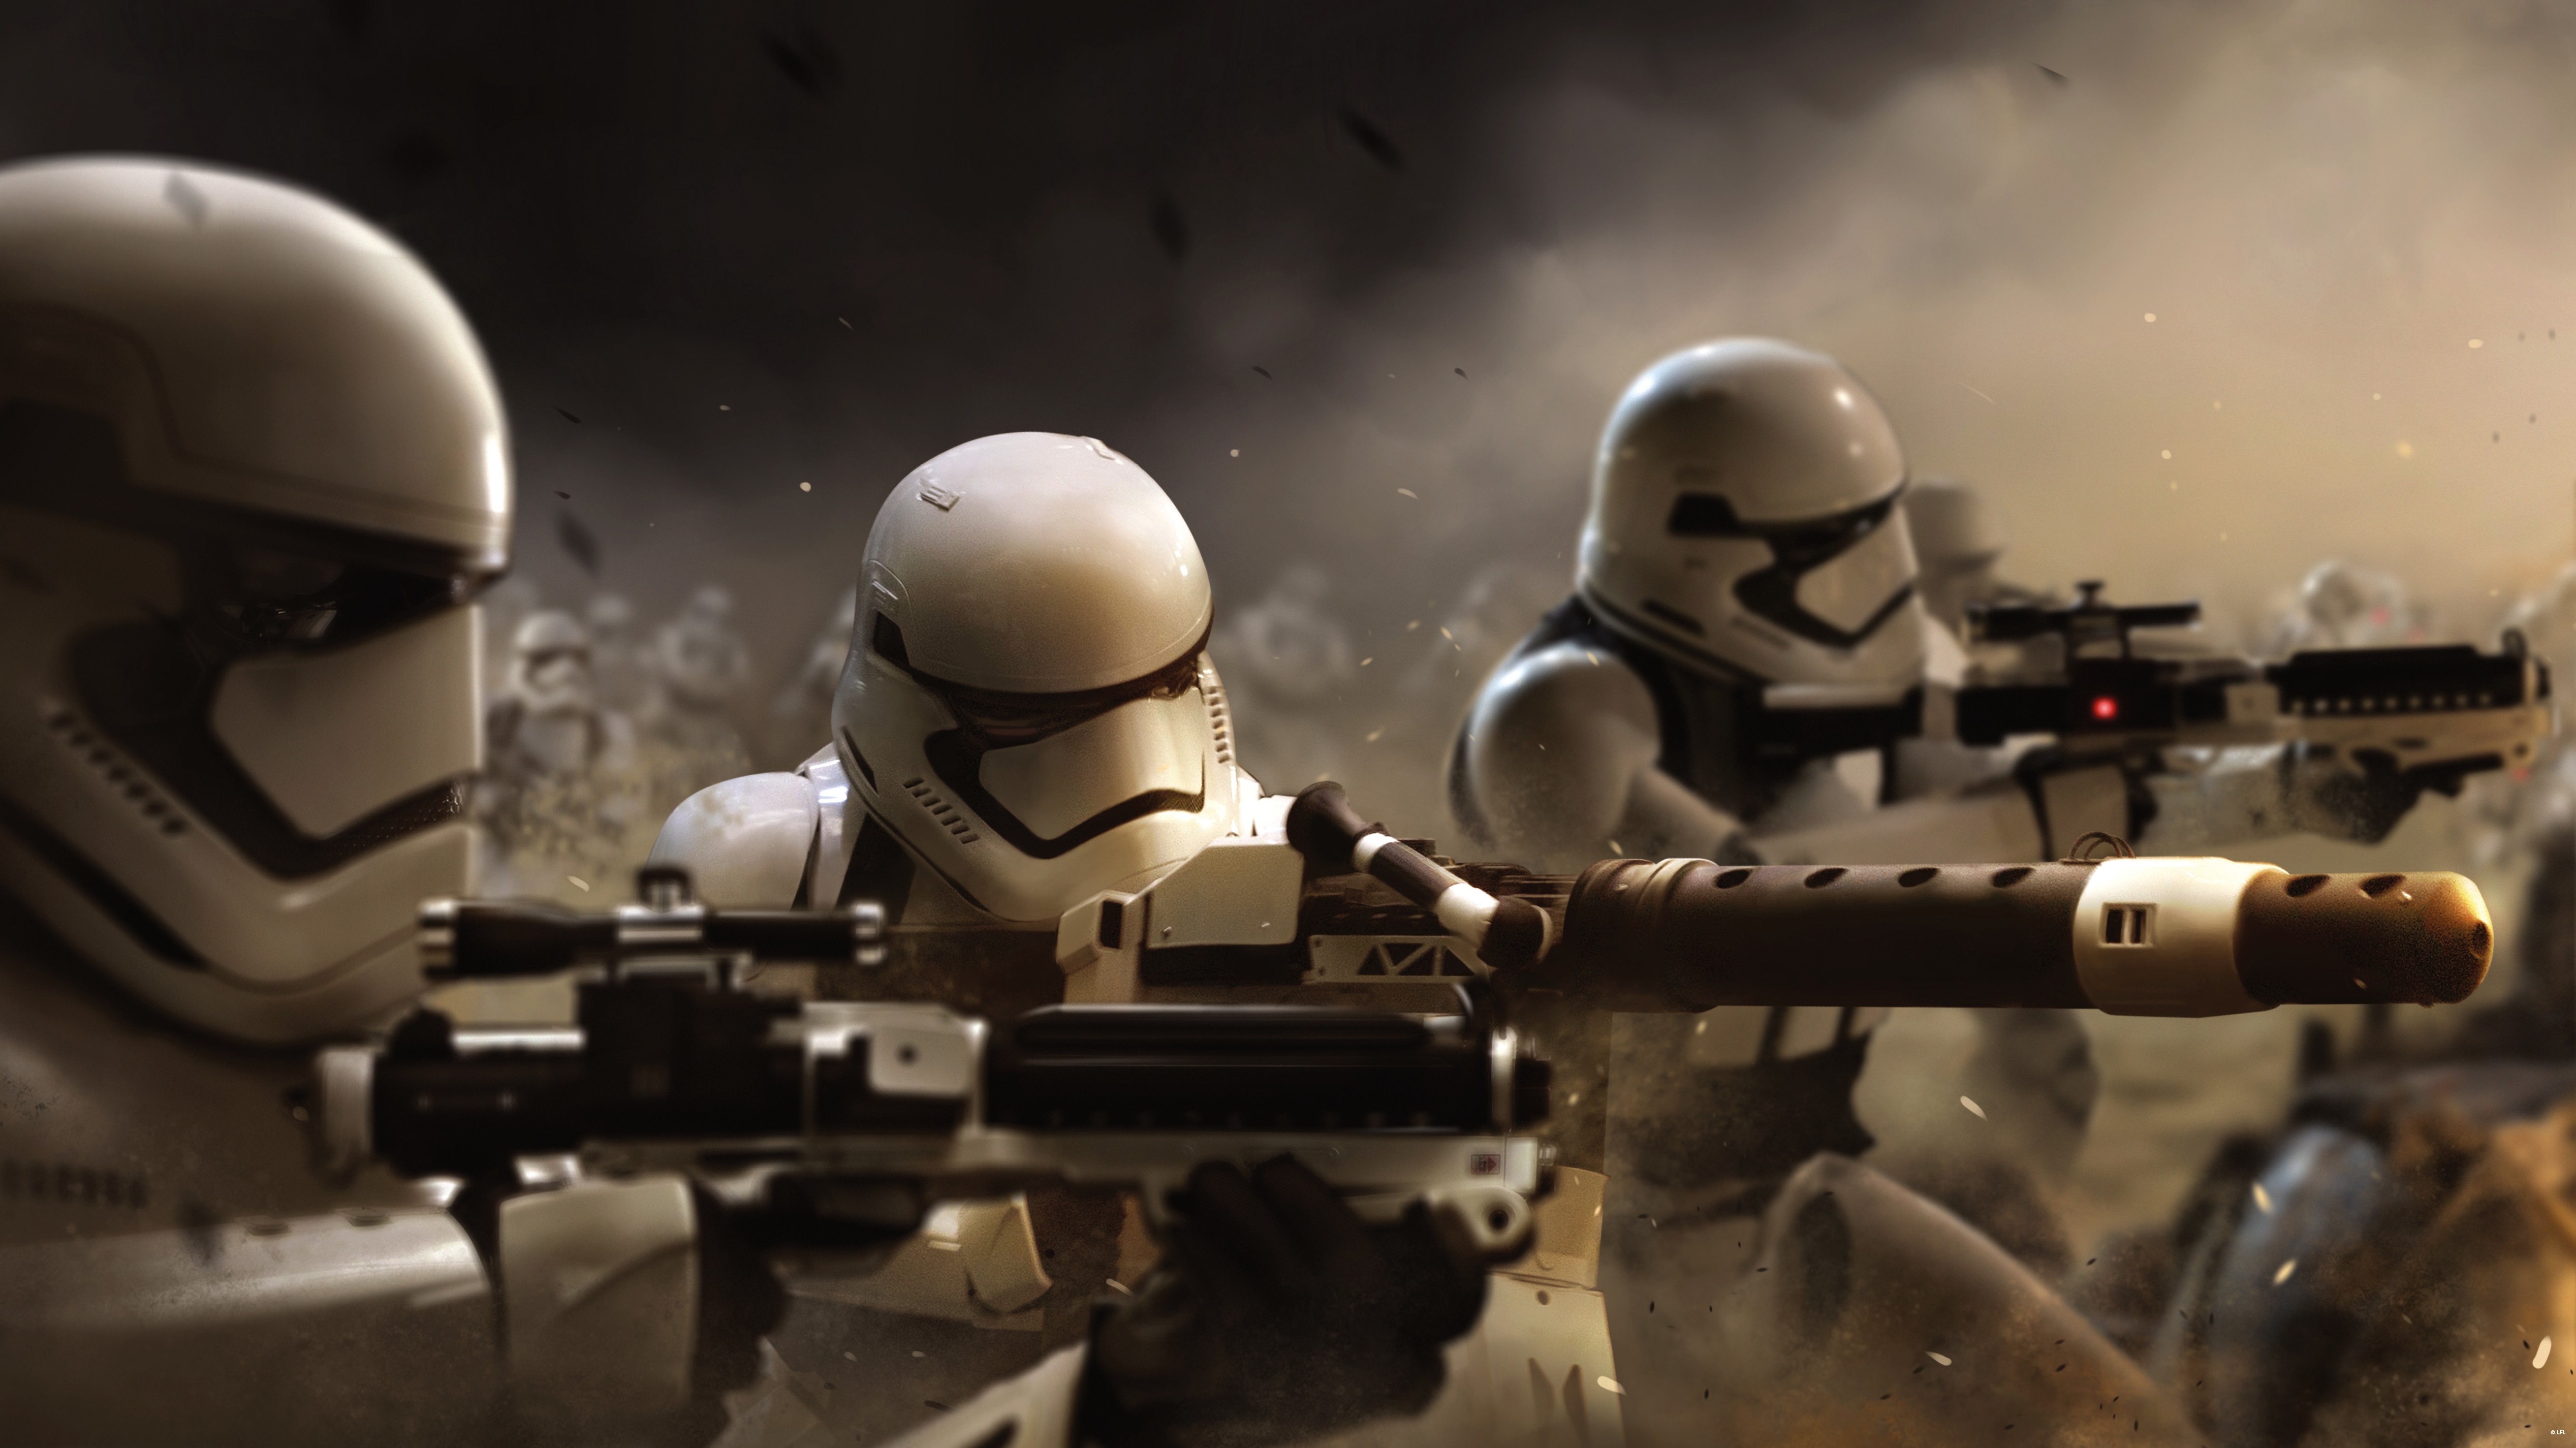 Star Wars Star Wars The Force Awakens Stormtrooper Movies The First Order 5070x2850